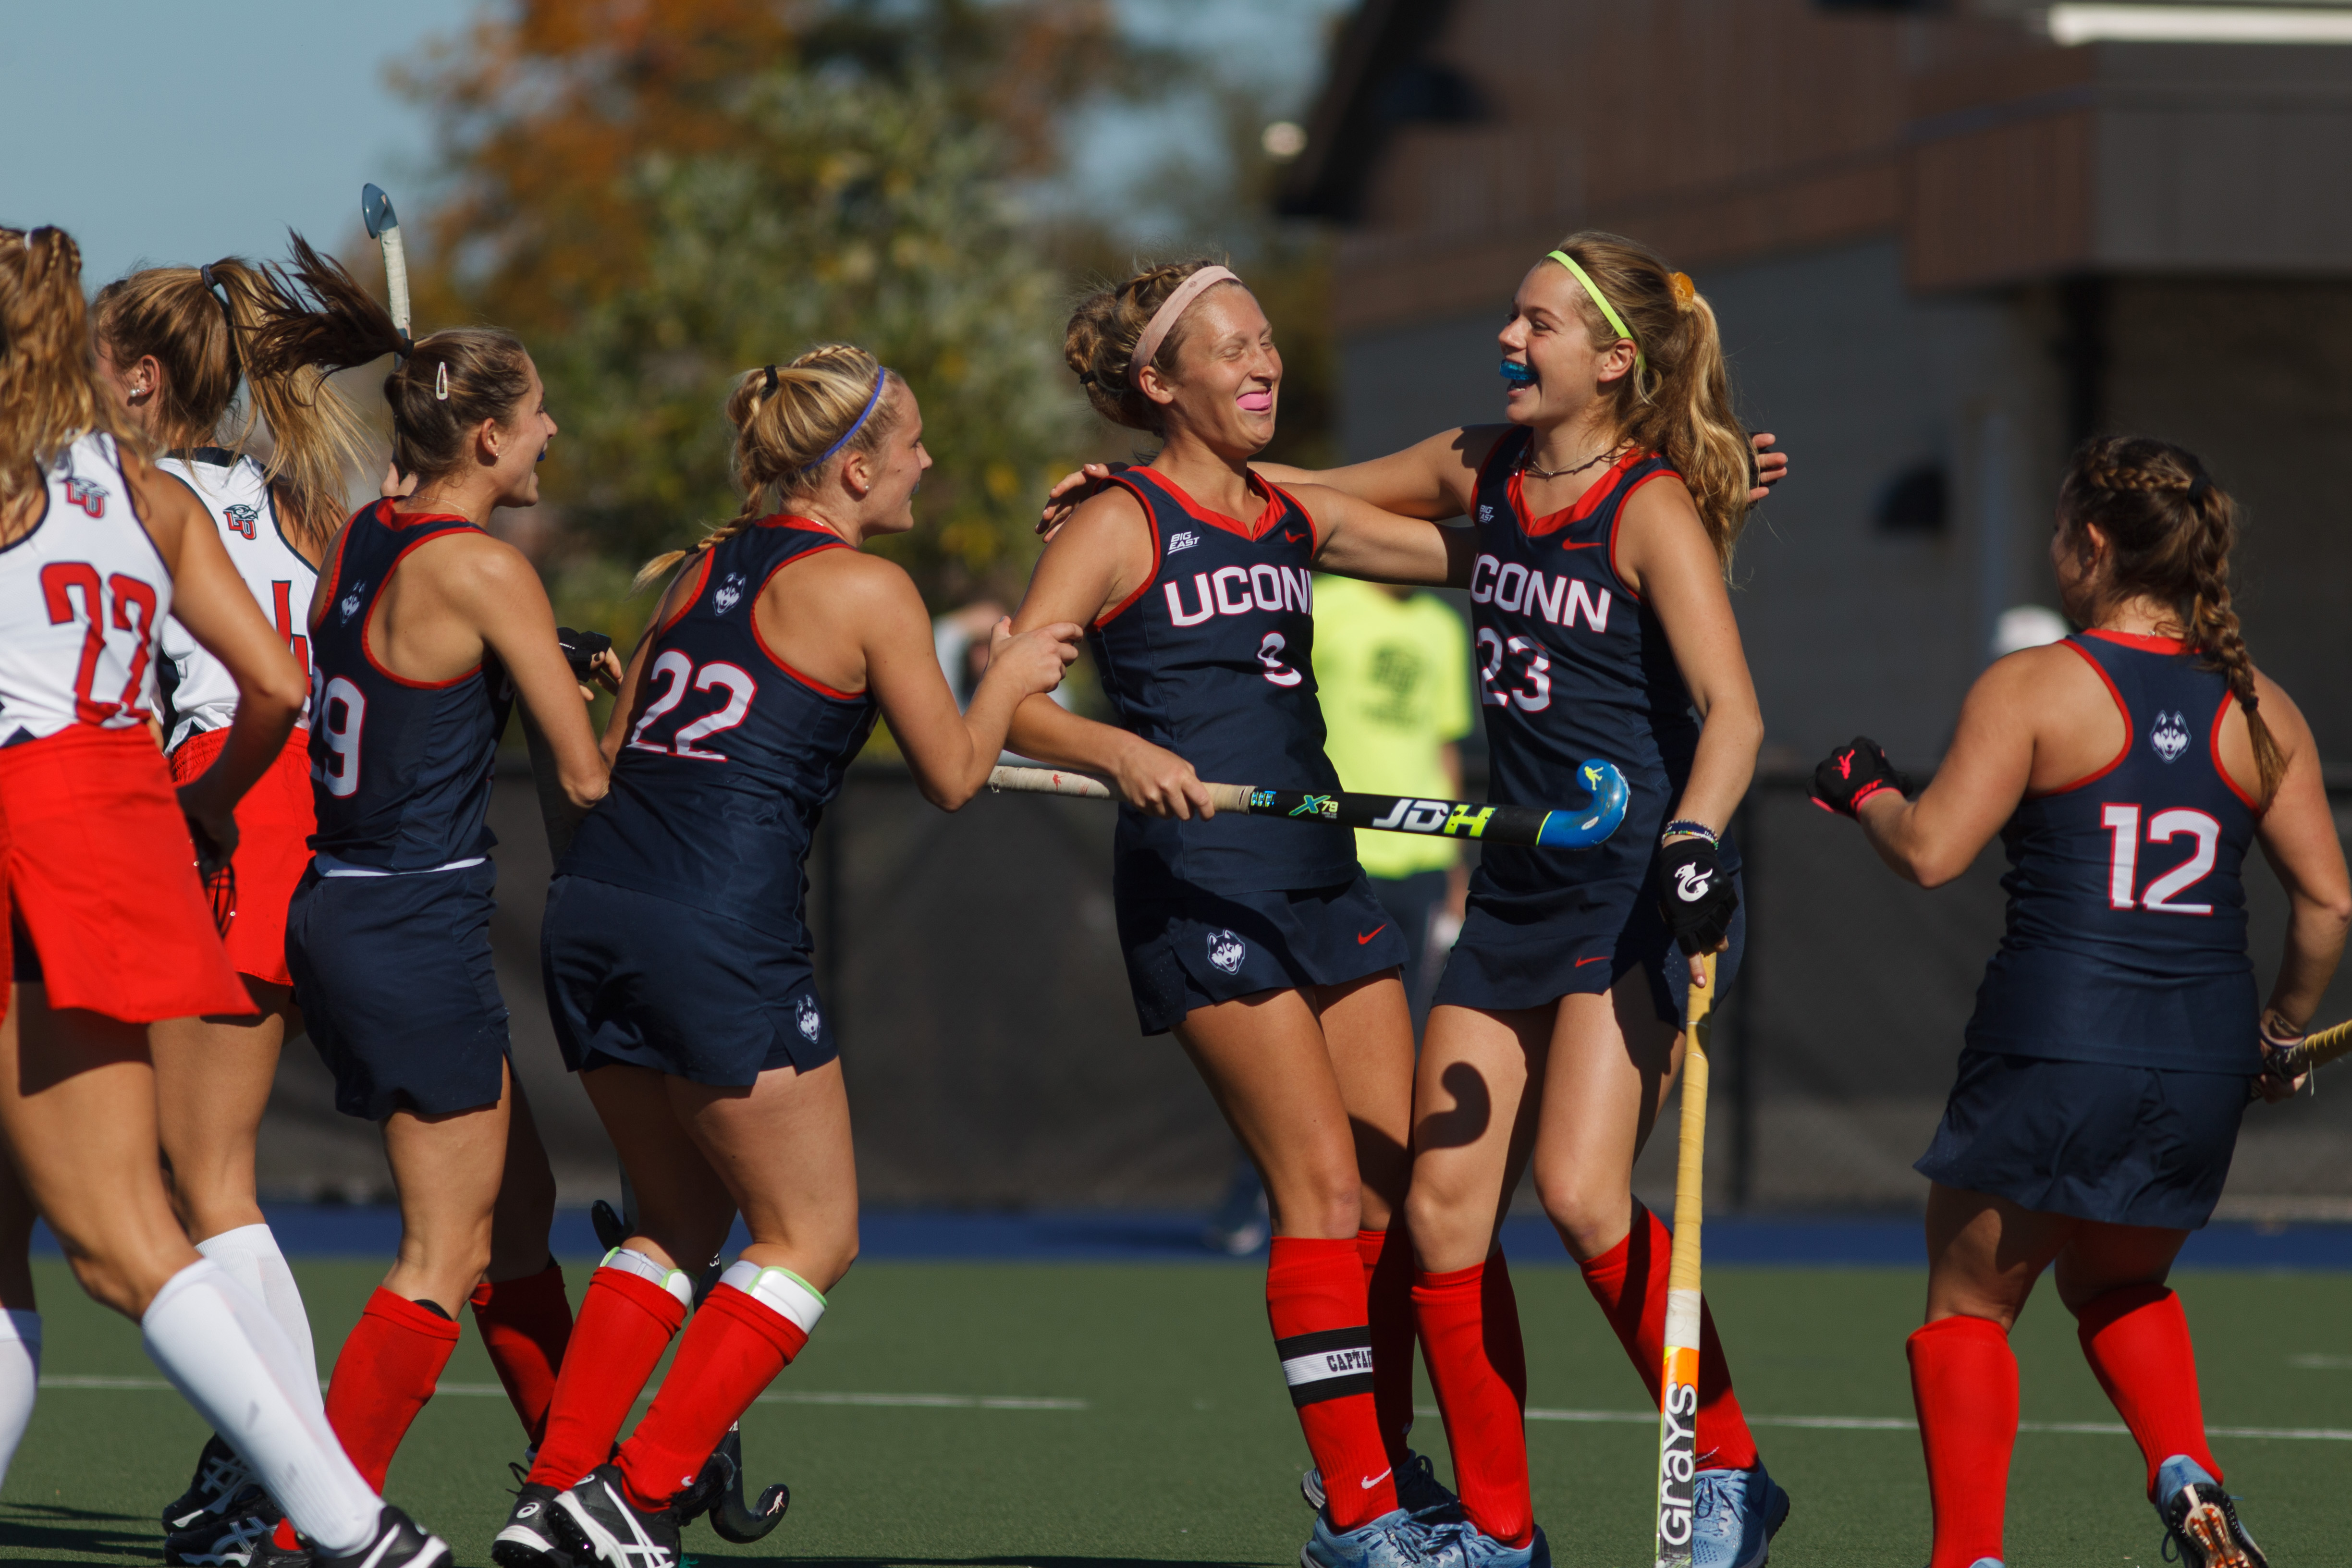 UConn defeated Liberty 5-3 to win the Big East Field Hockey Championship on Nov. 4, 2018. (Joel Coleman for UConn)